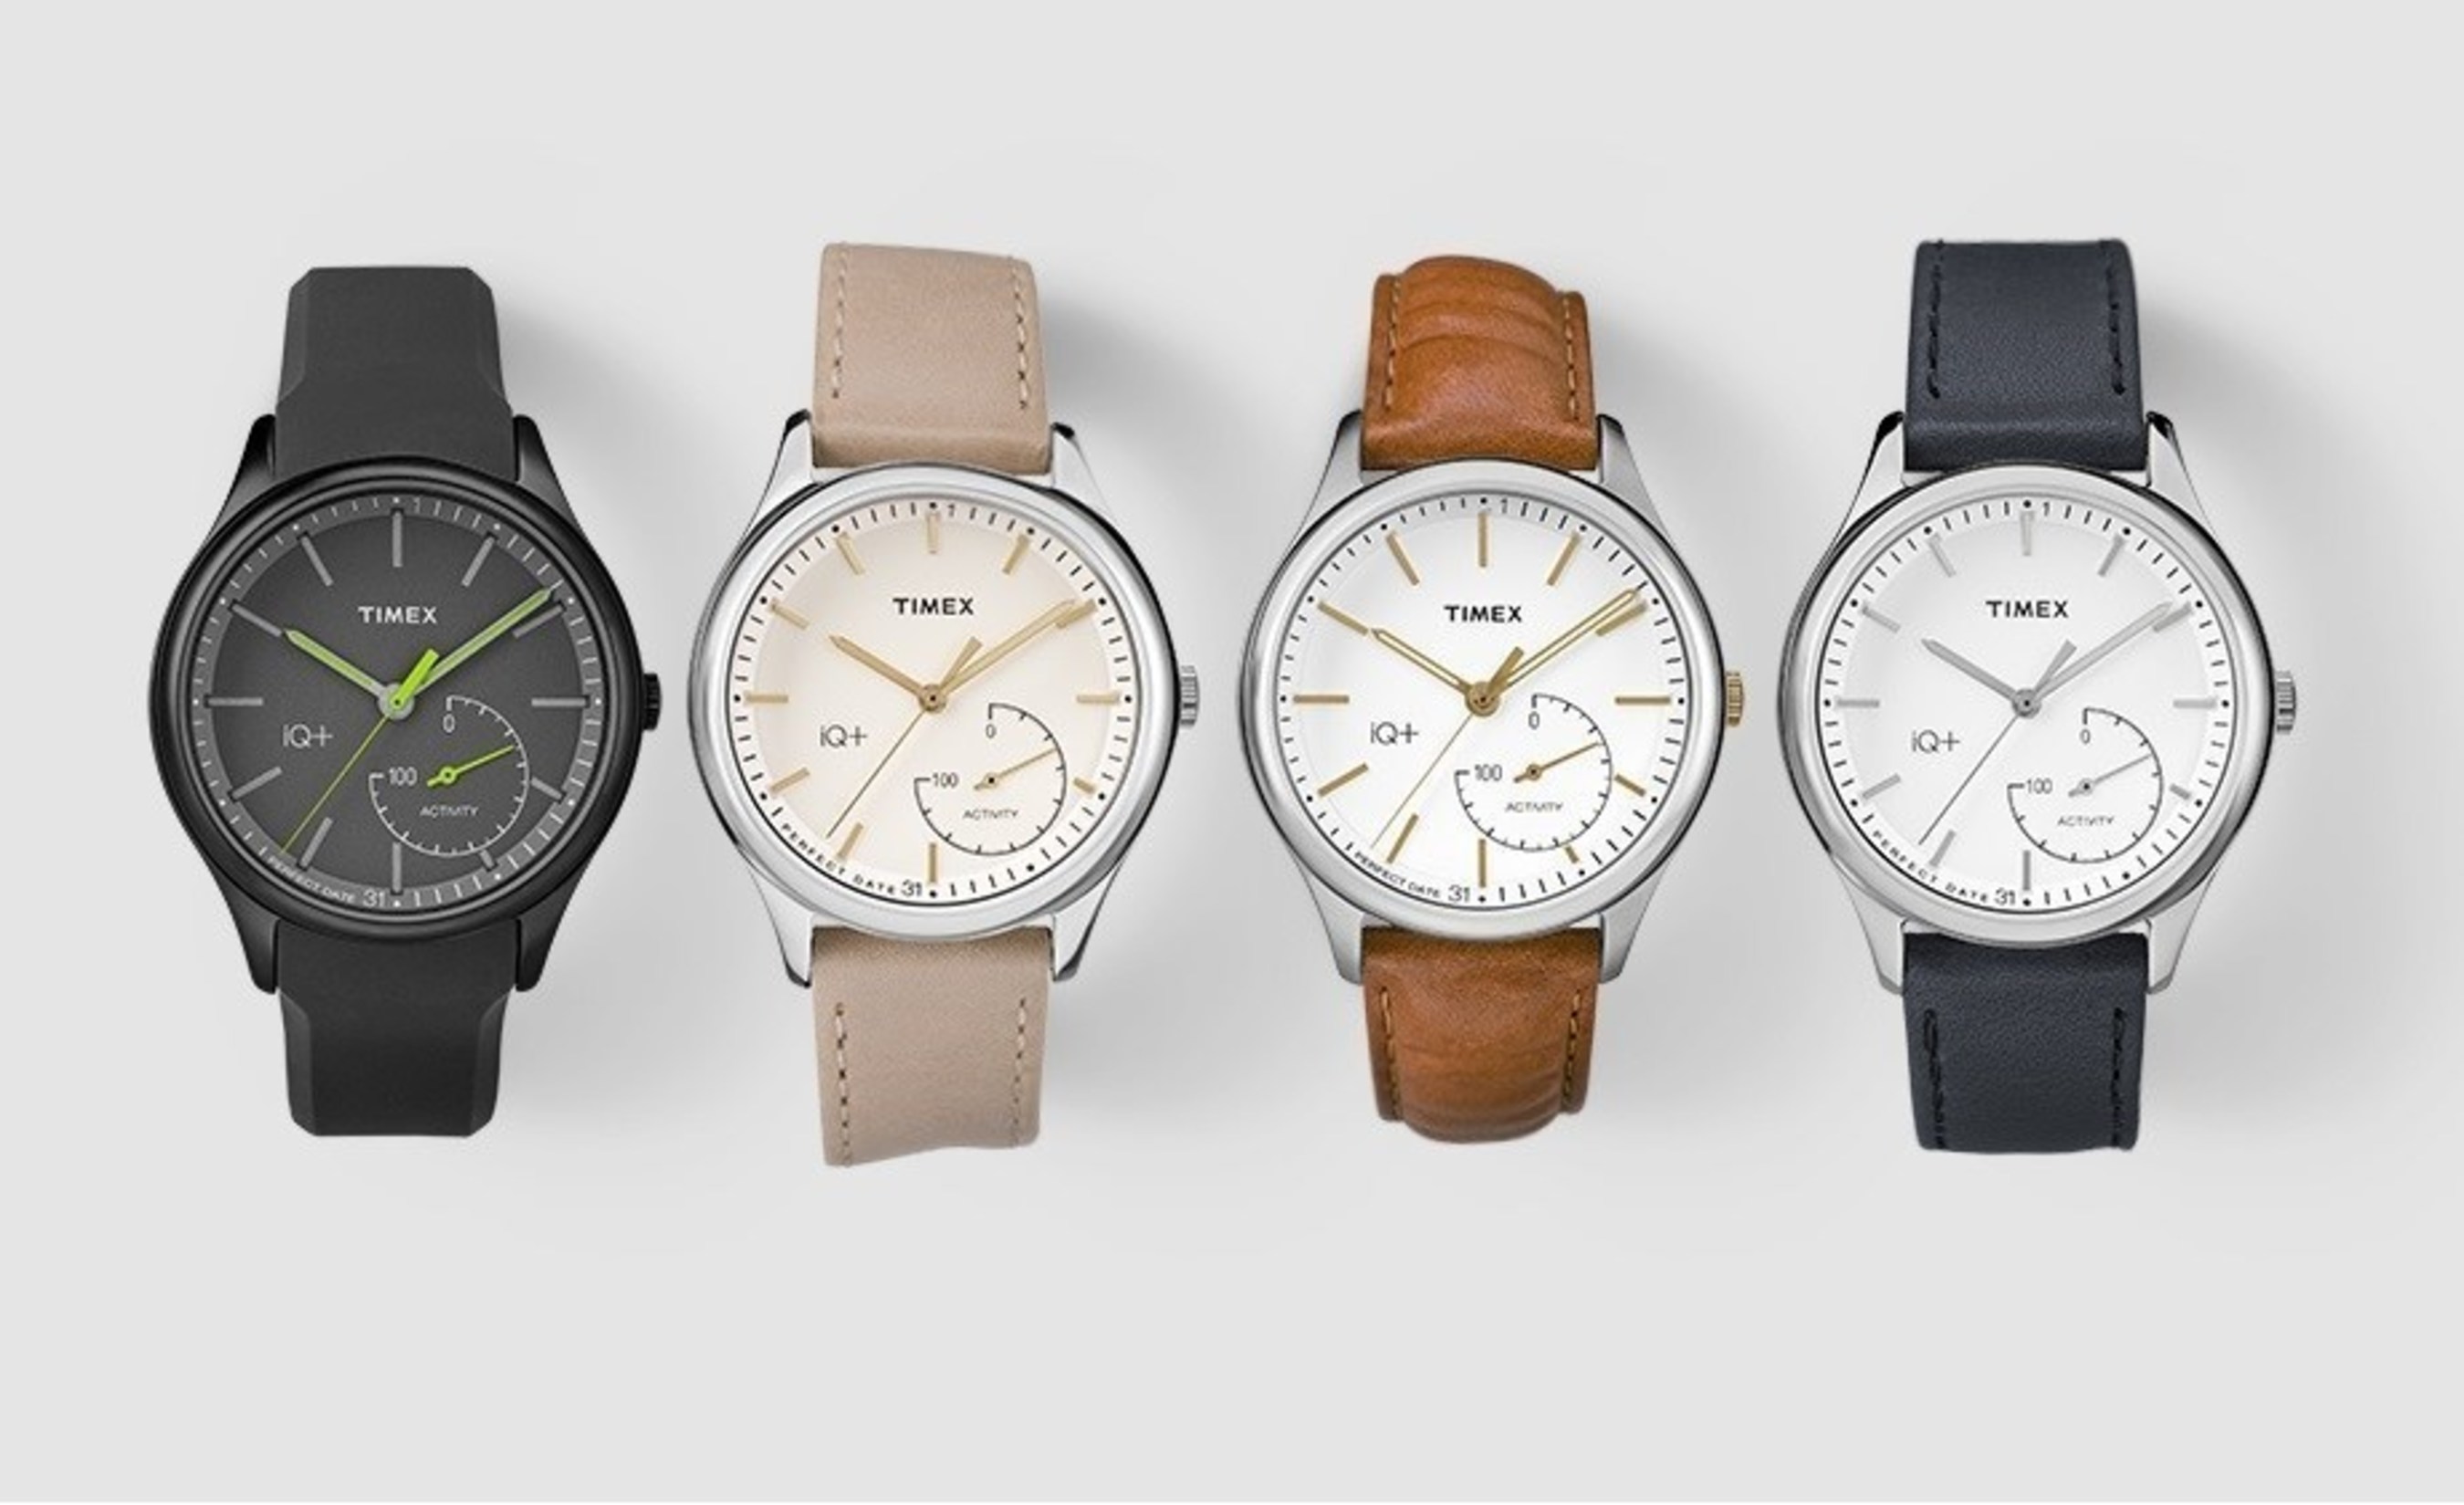 Timex Launches IQ+ Move, New Line of Sophisticated Analog Timepieces for Men and Women Equipped with Discreet and Incognito Activity Tracking Technology